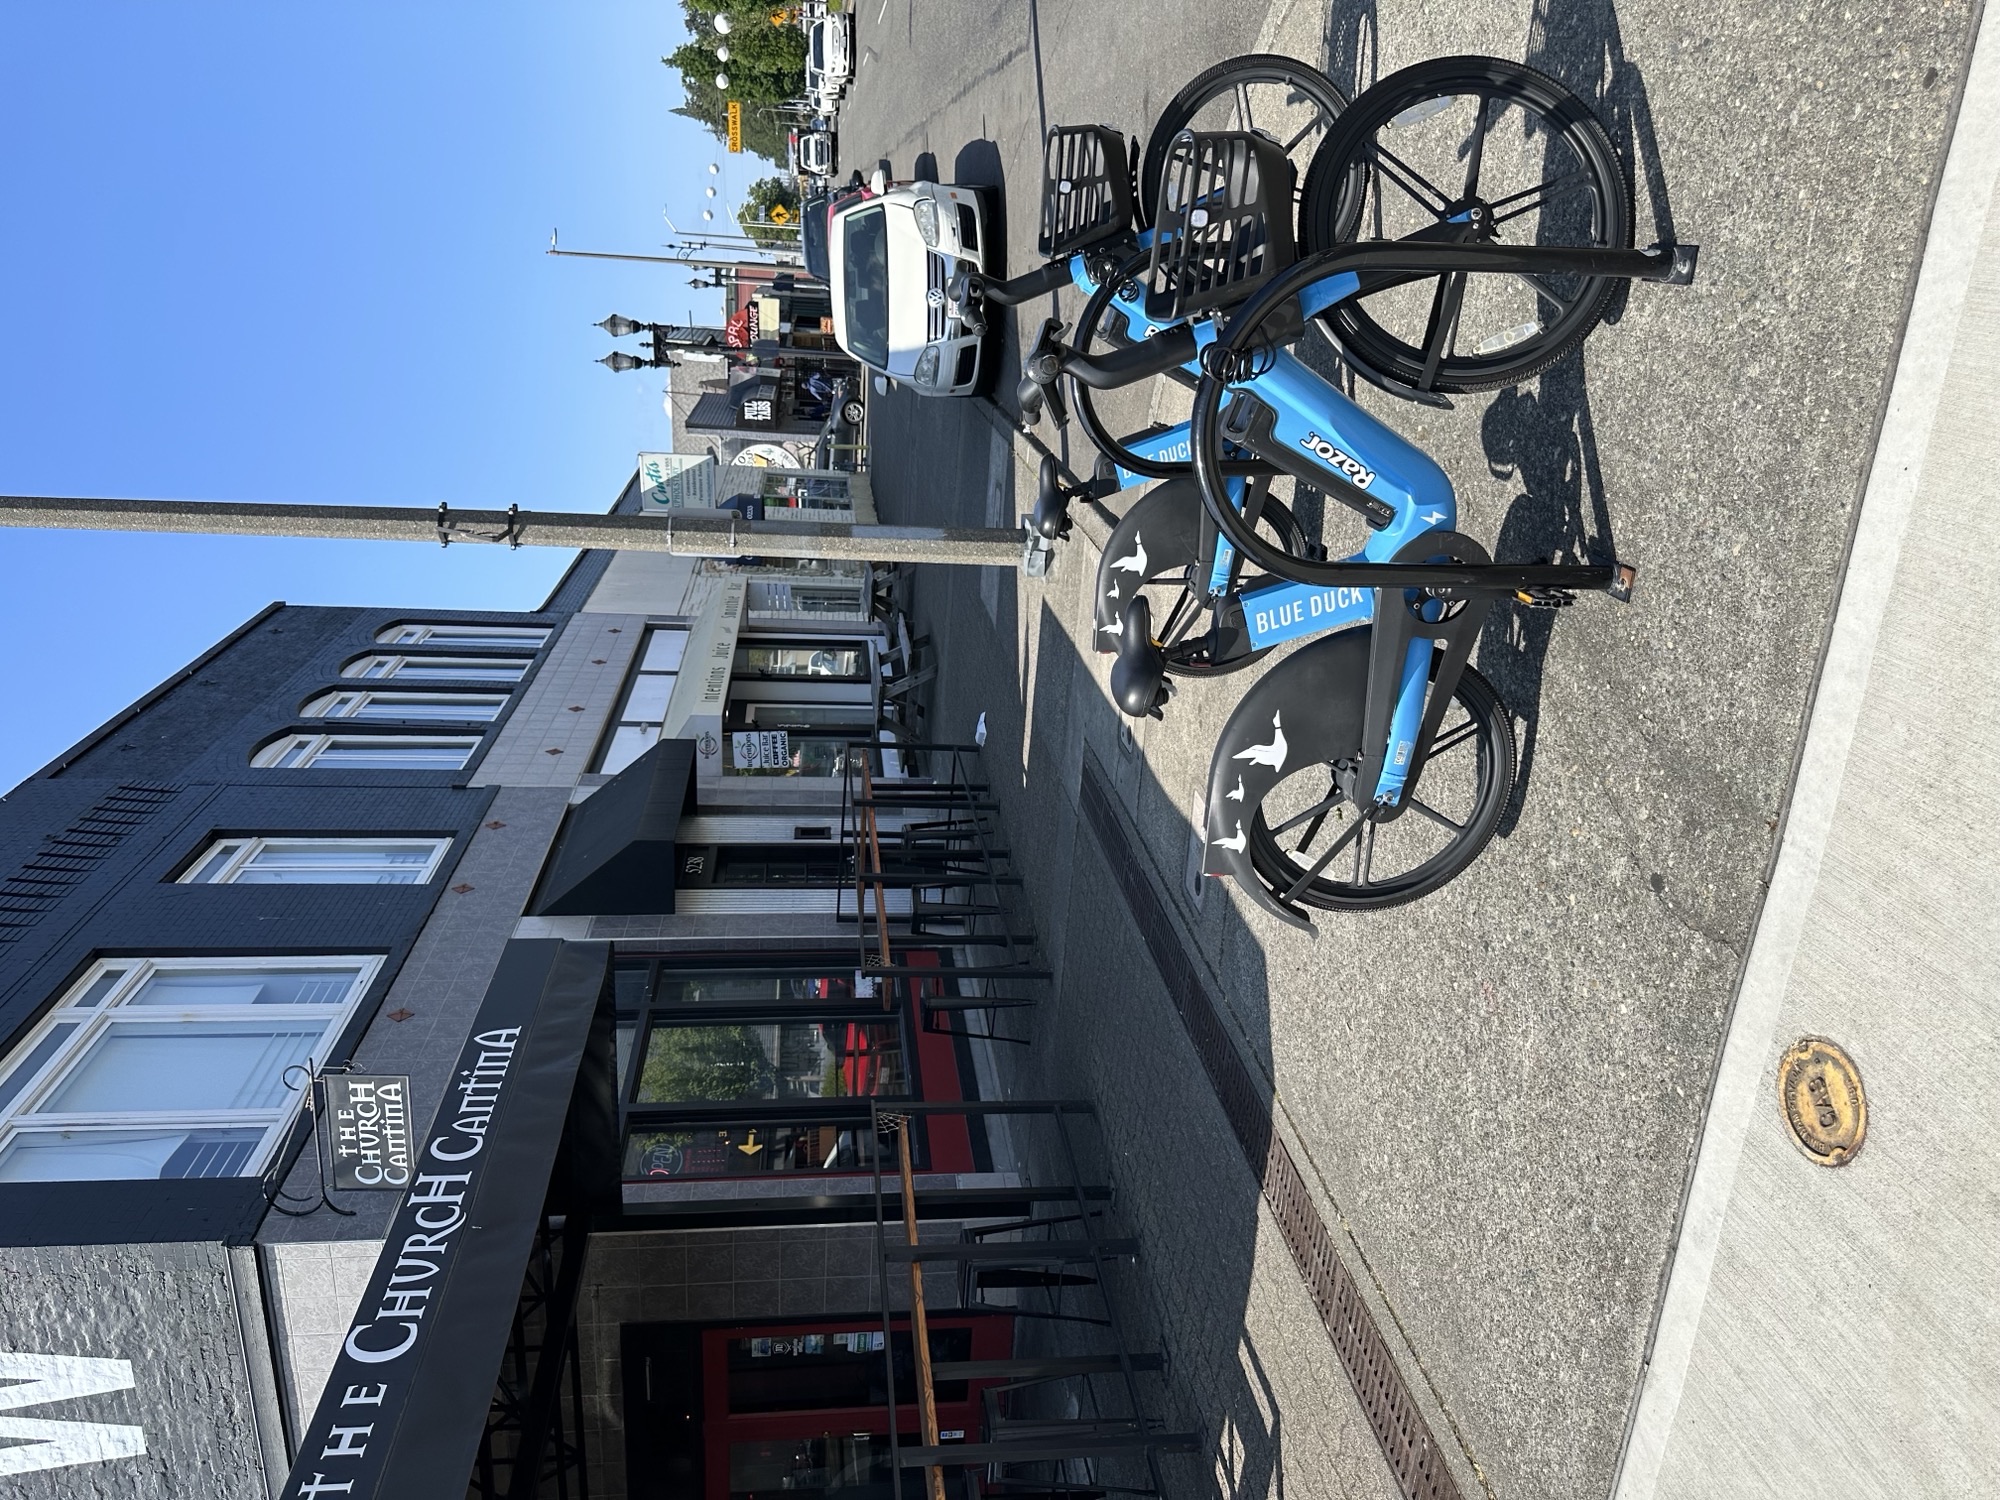 Bright blue e-bikes parked in the South Tacoma Business District